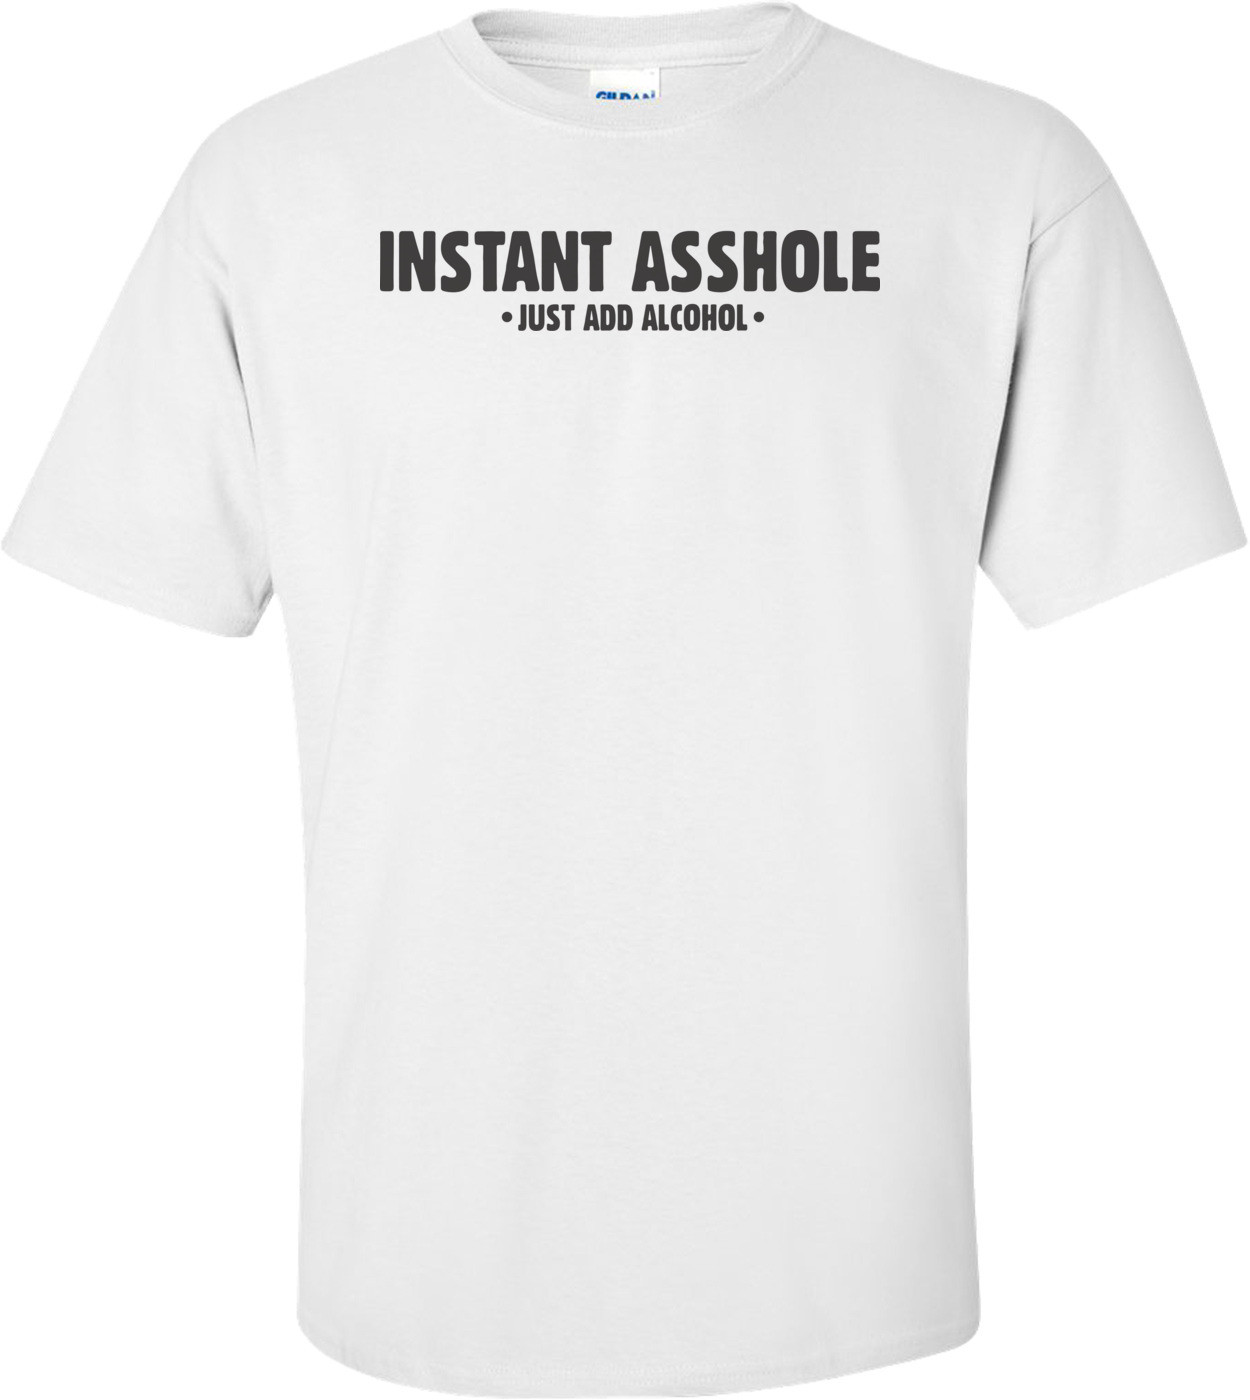 Instant Asshole Just Add Alcohol T-shirt